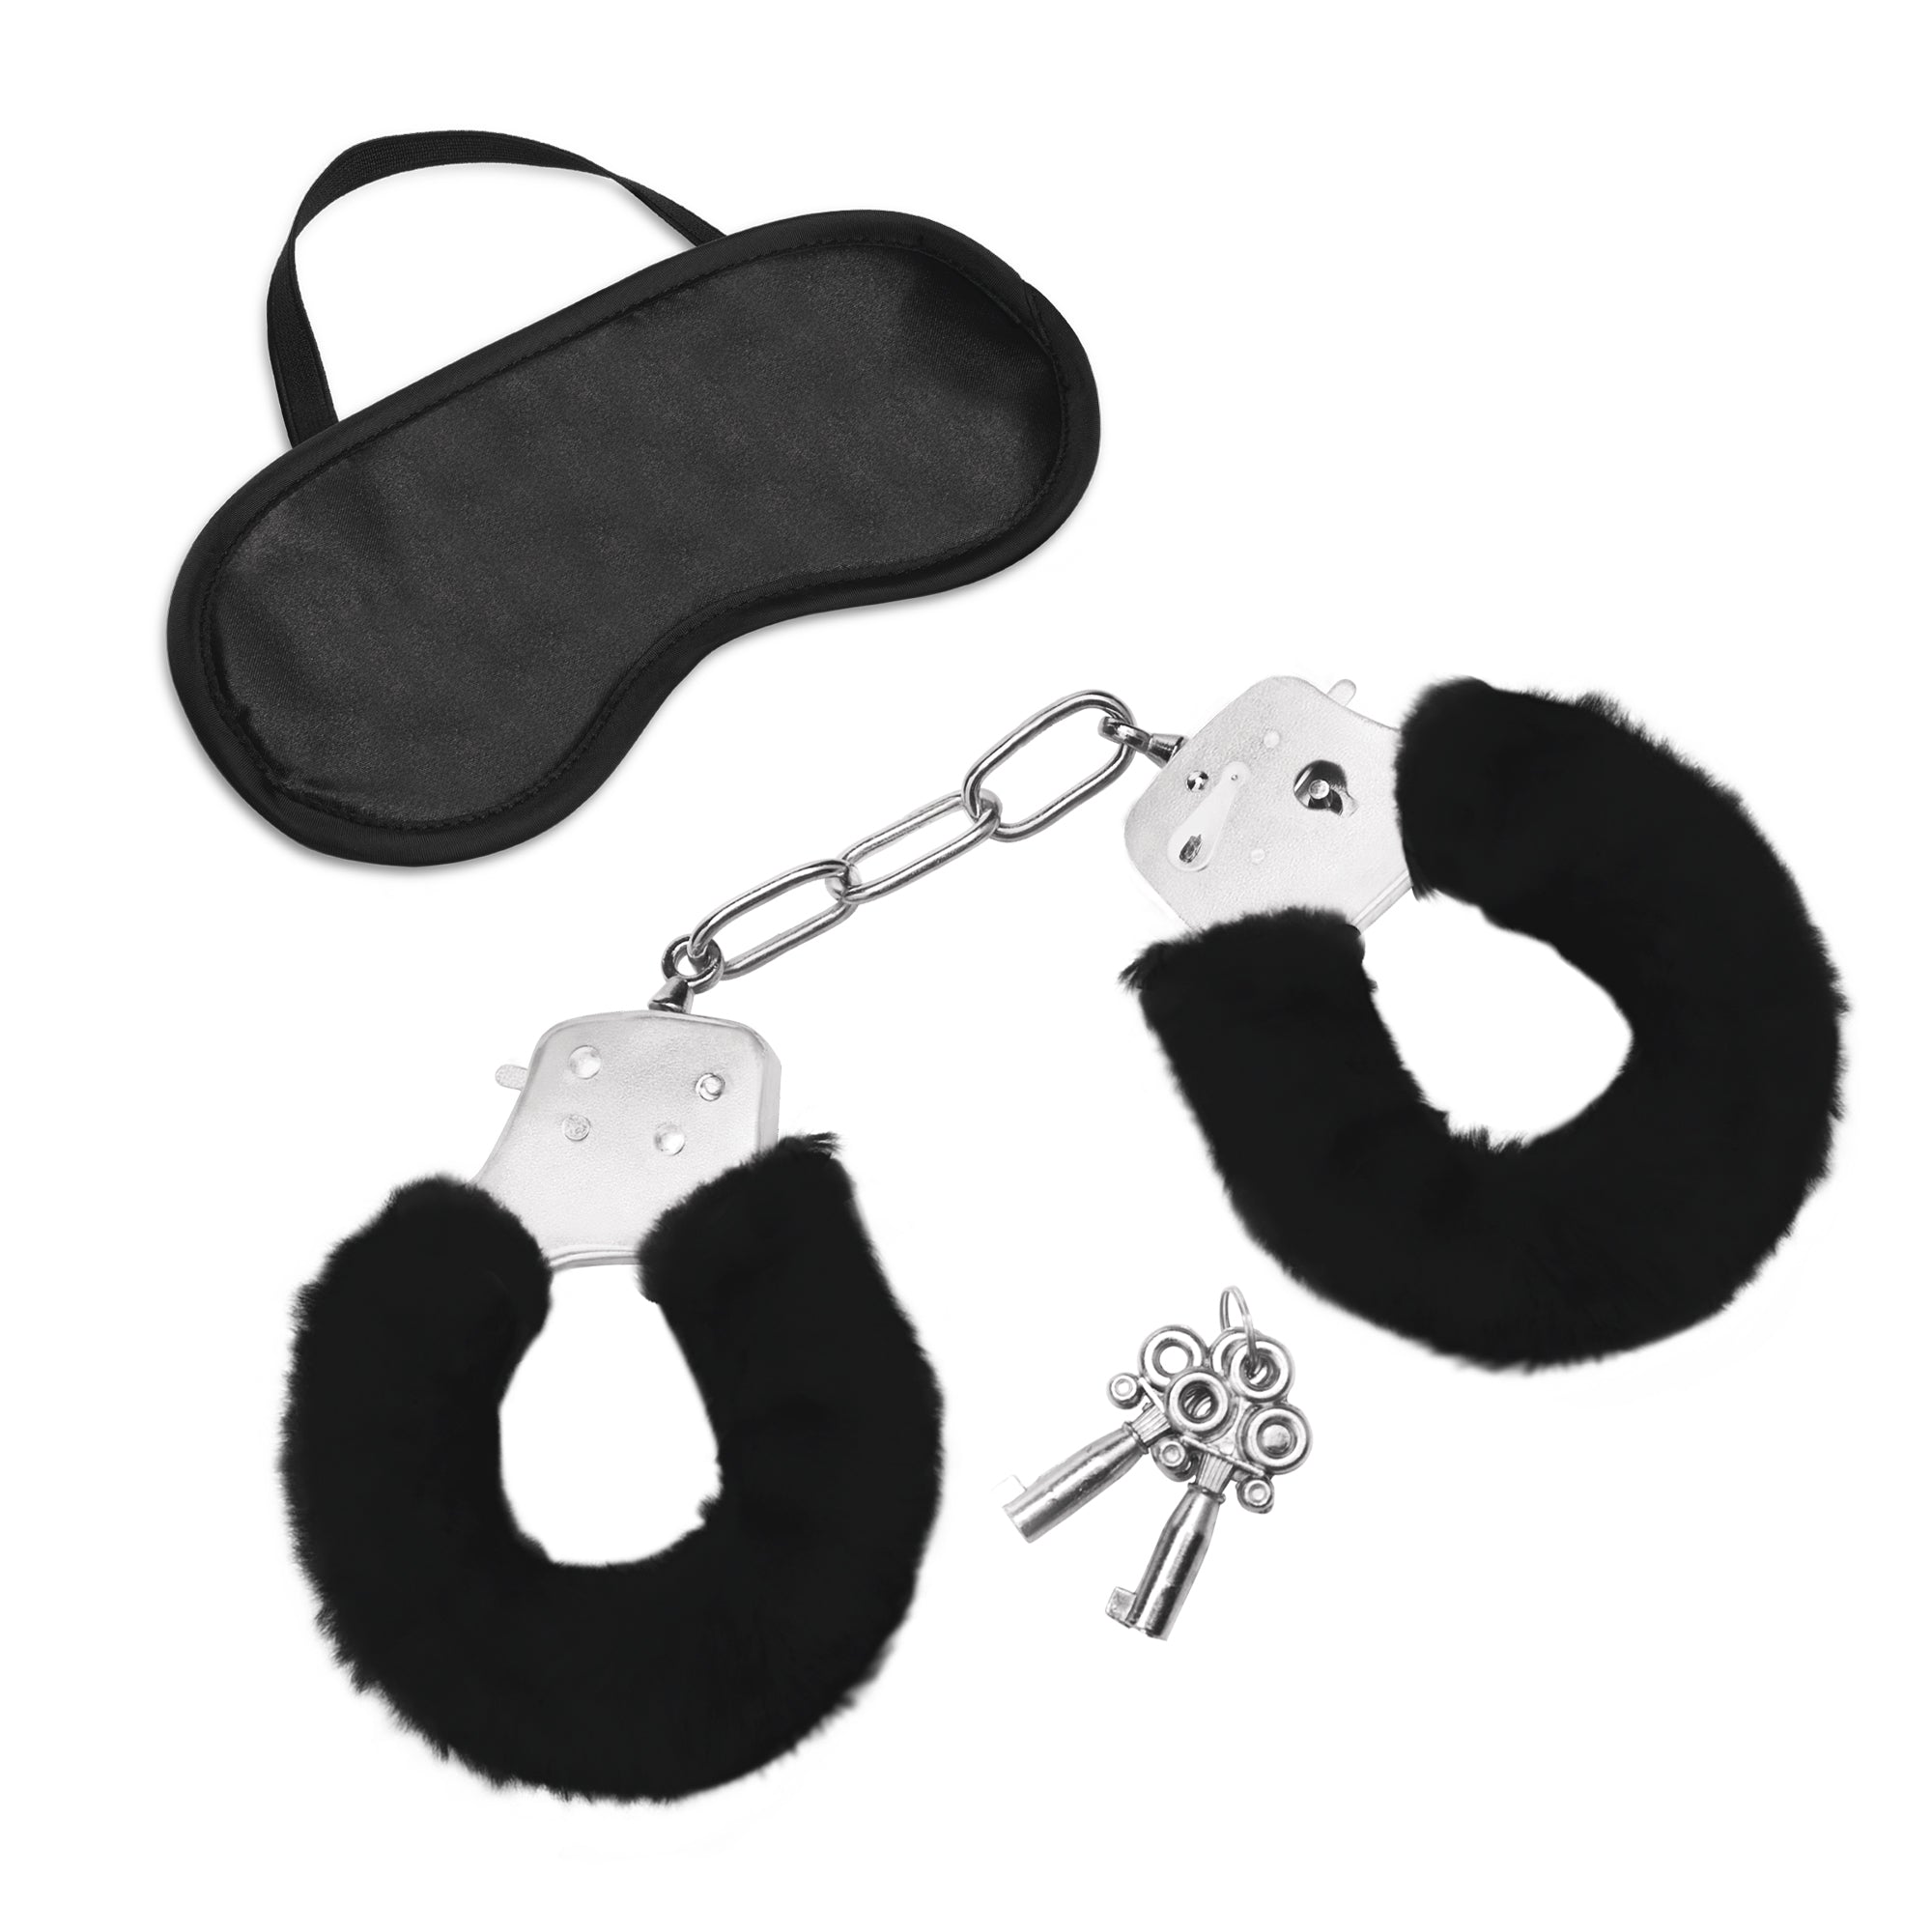 Furry Love Cuffs & Blindfold Set - SMES-916